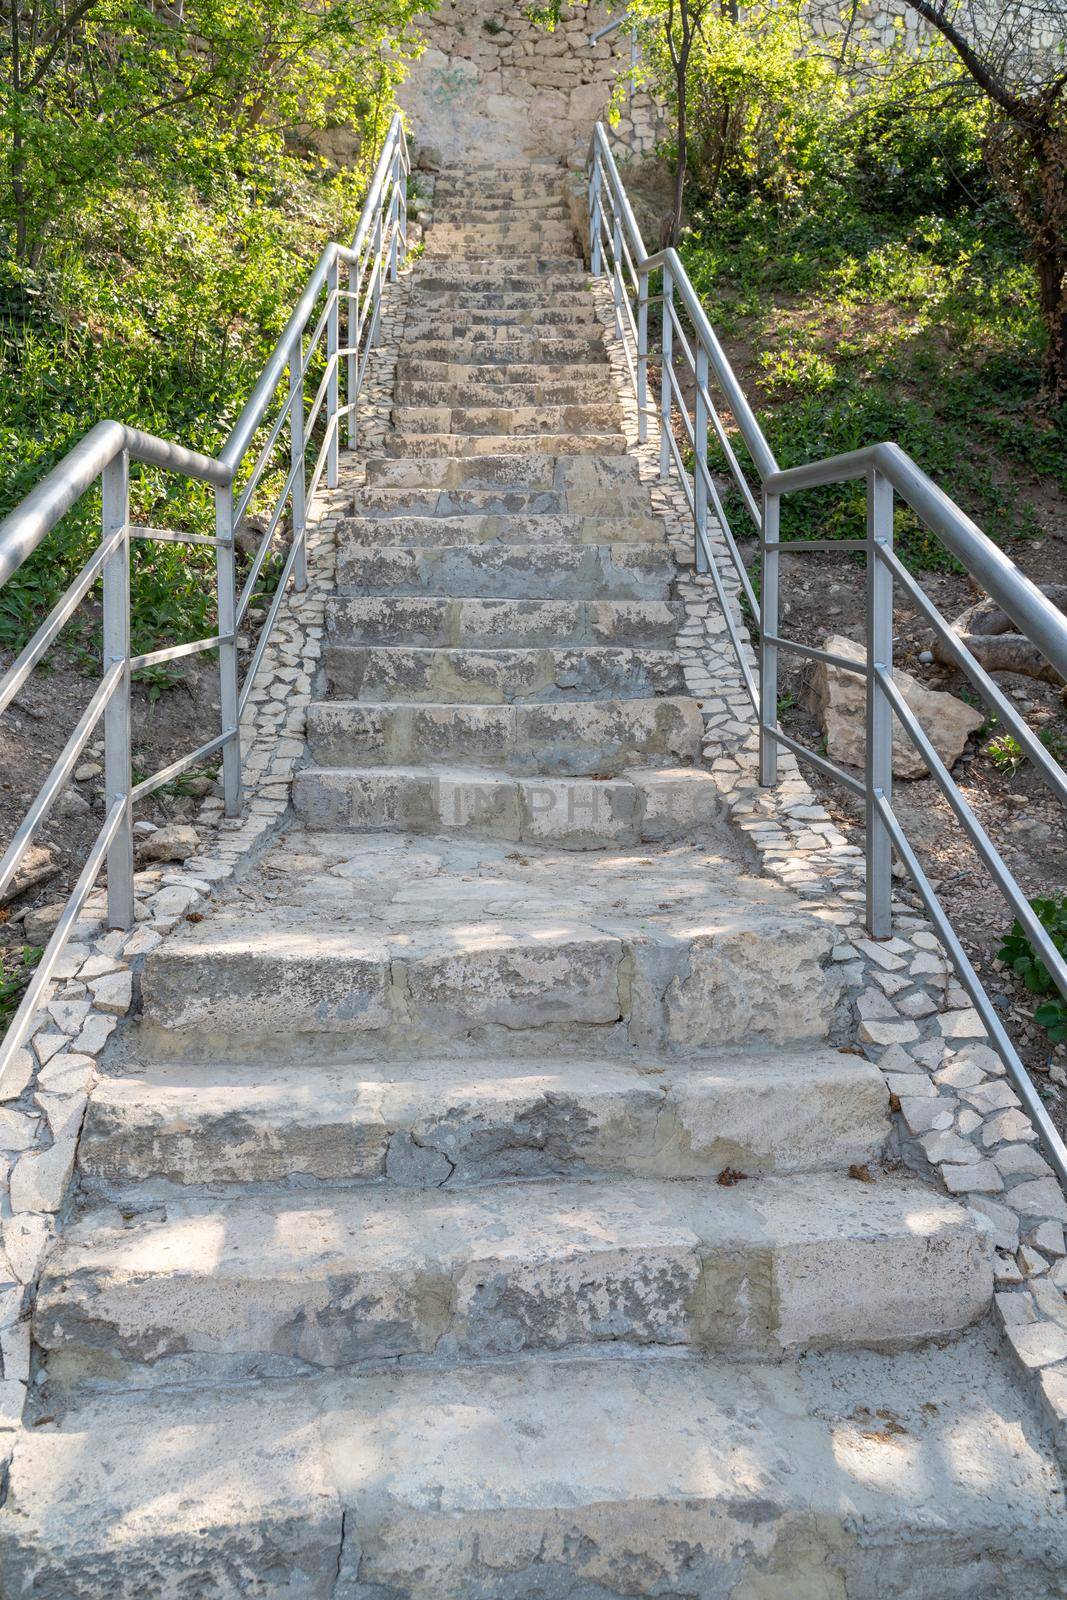 A new stone staircase of 800 steps to Jasper Beach, built in the spring of 2020. The reserve on the Black Sea. Cape Fiolent, Crimea Peninsula. The concept of unity with nature, outdoor activities